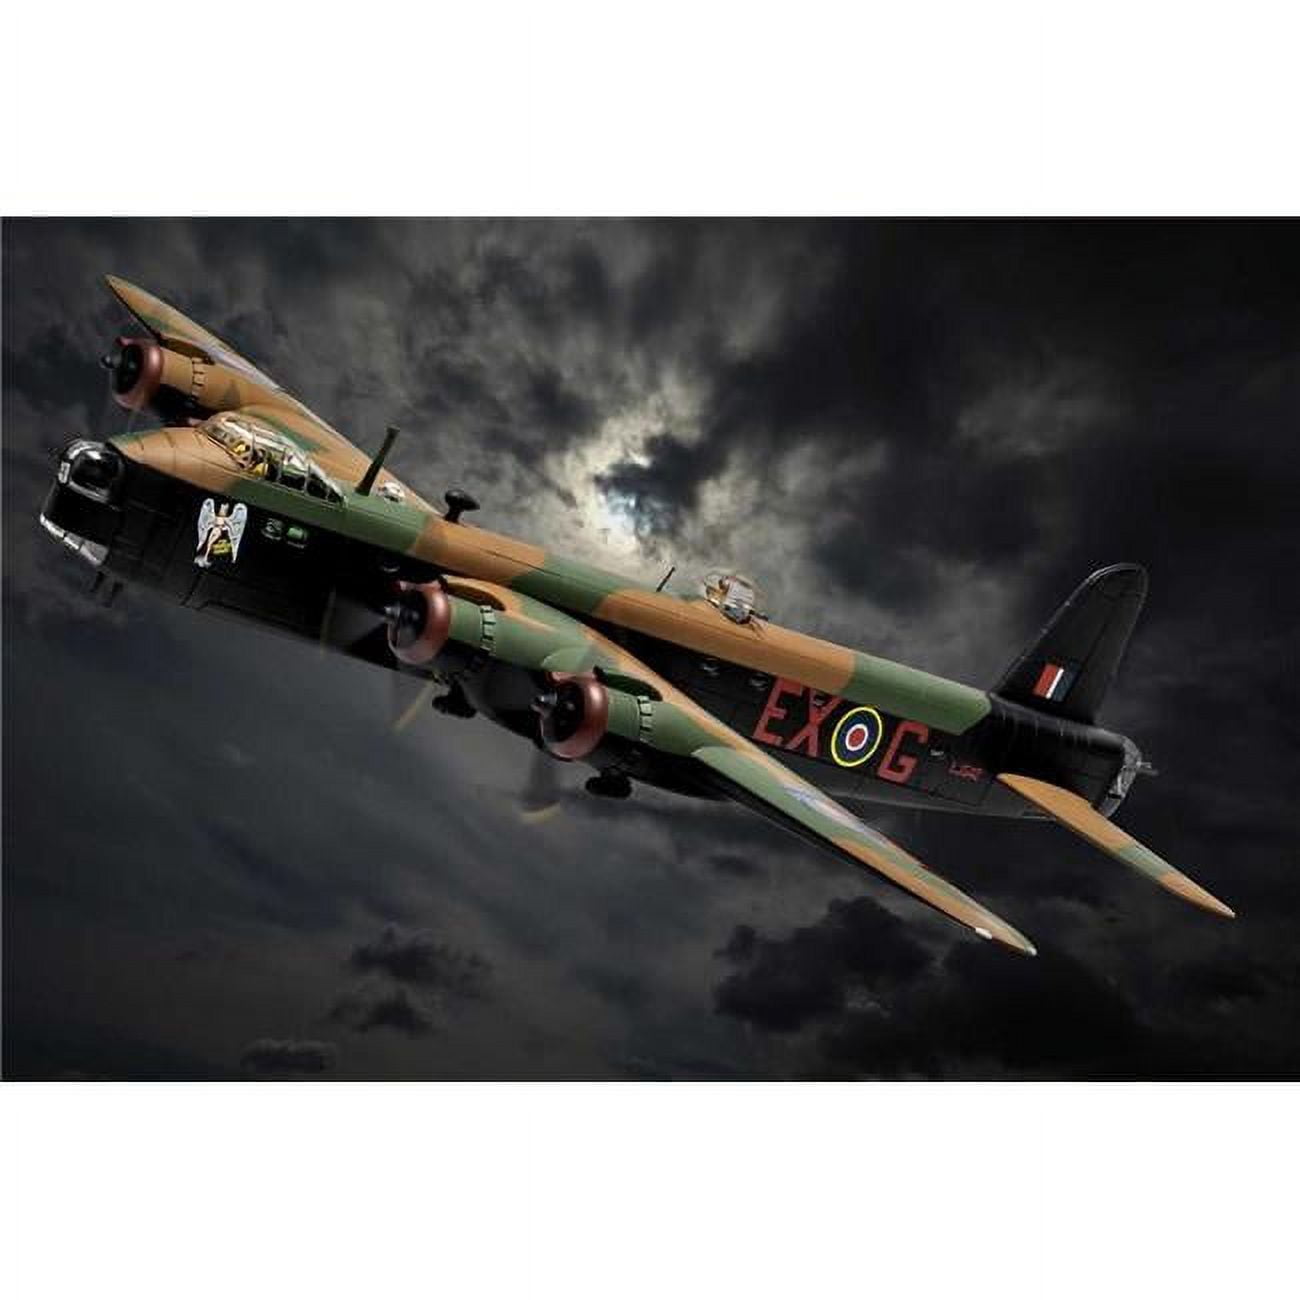 Picture of Corgi CG39504 1-72 Scale Short Stirling MK. III LJ542 The Gremlin Teaser Squadron Diecast Model Airplane